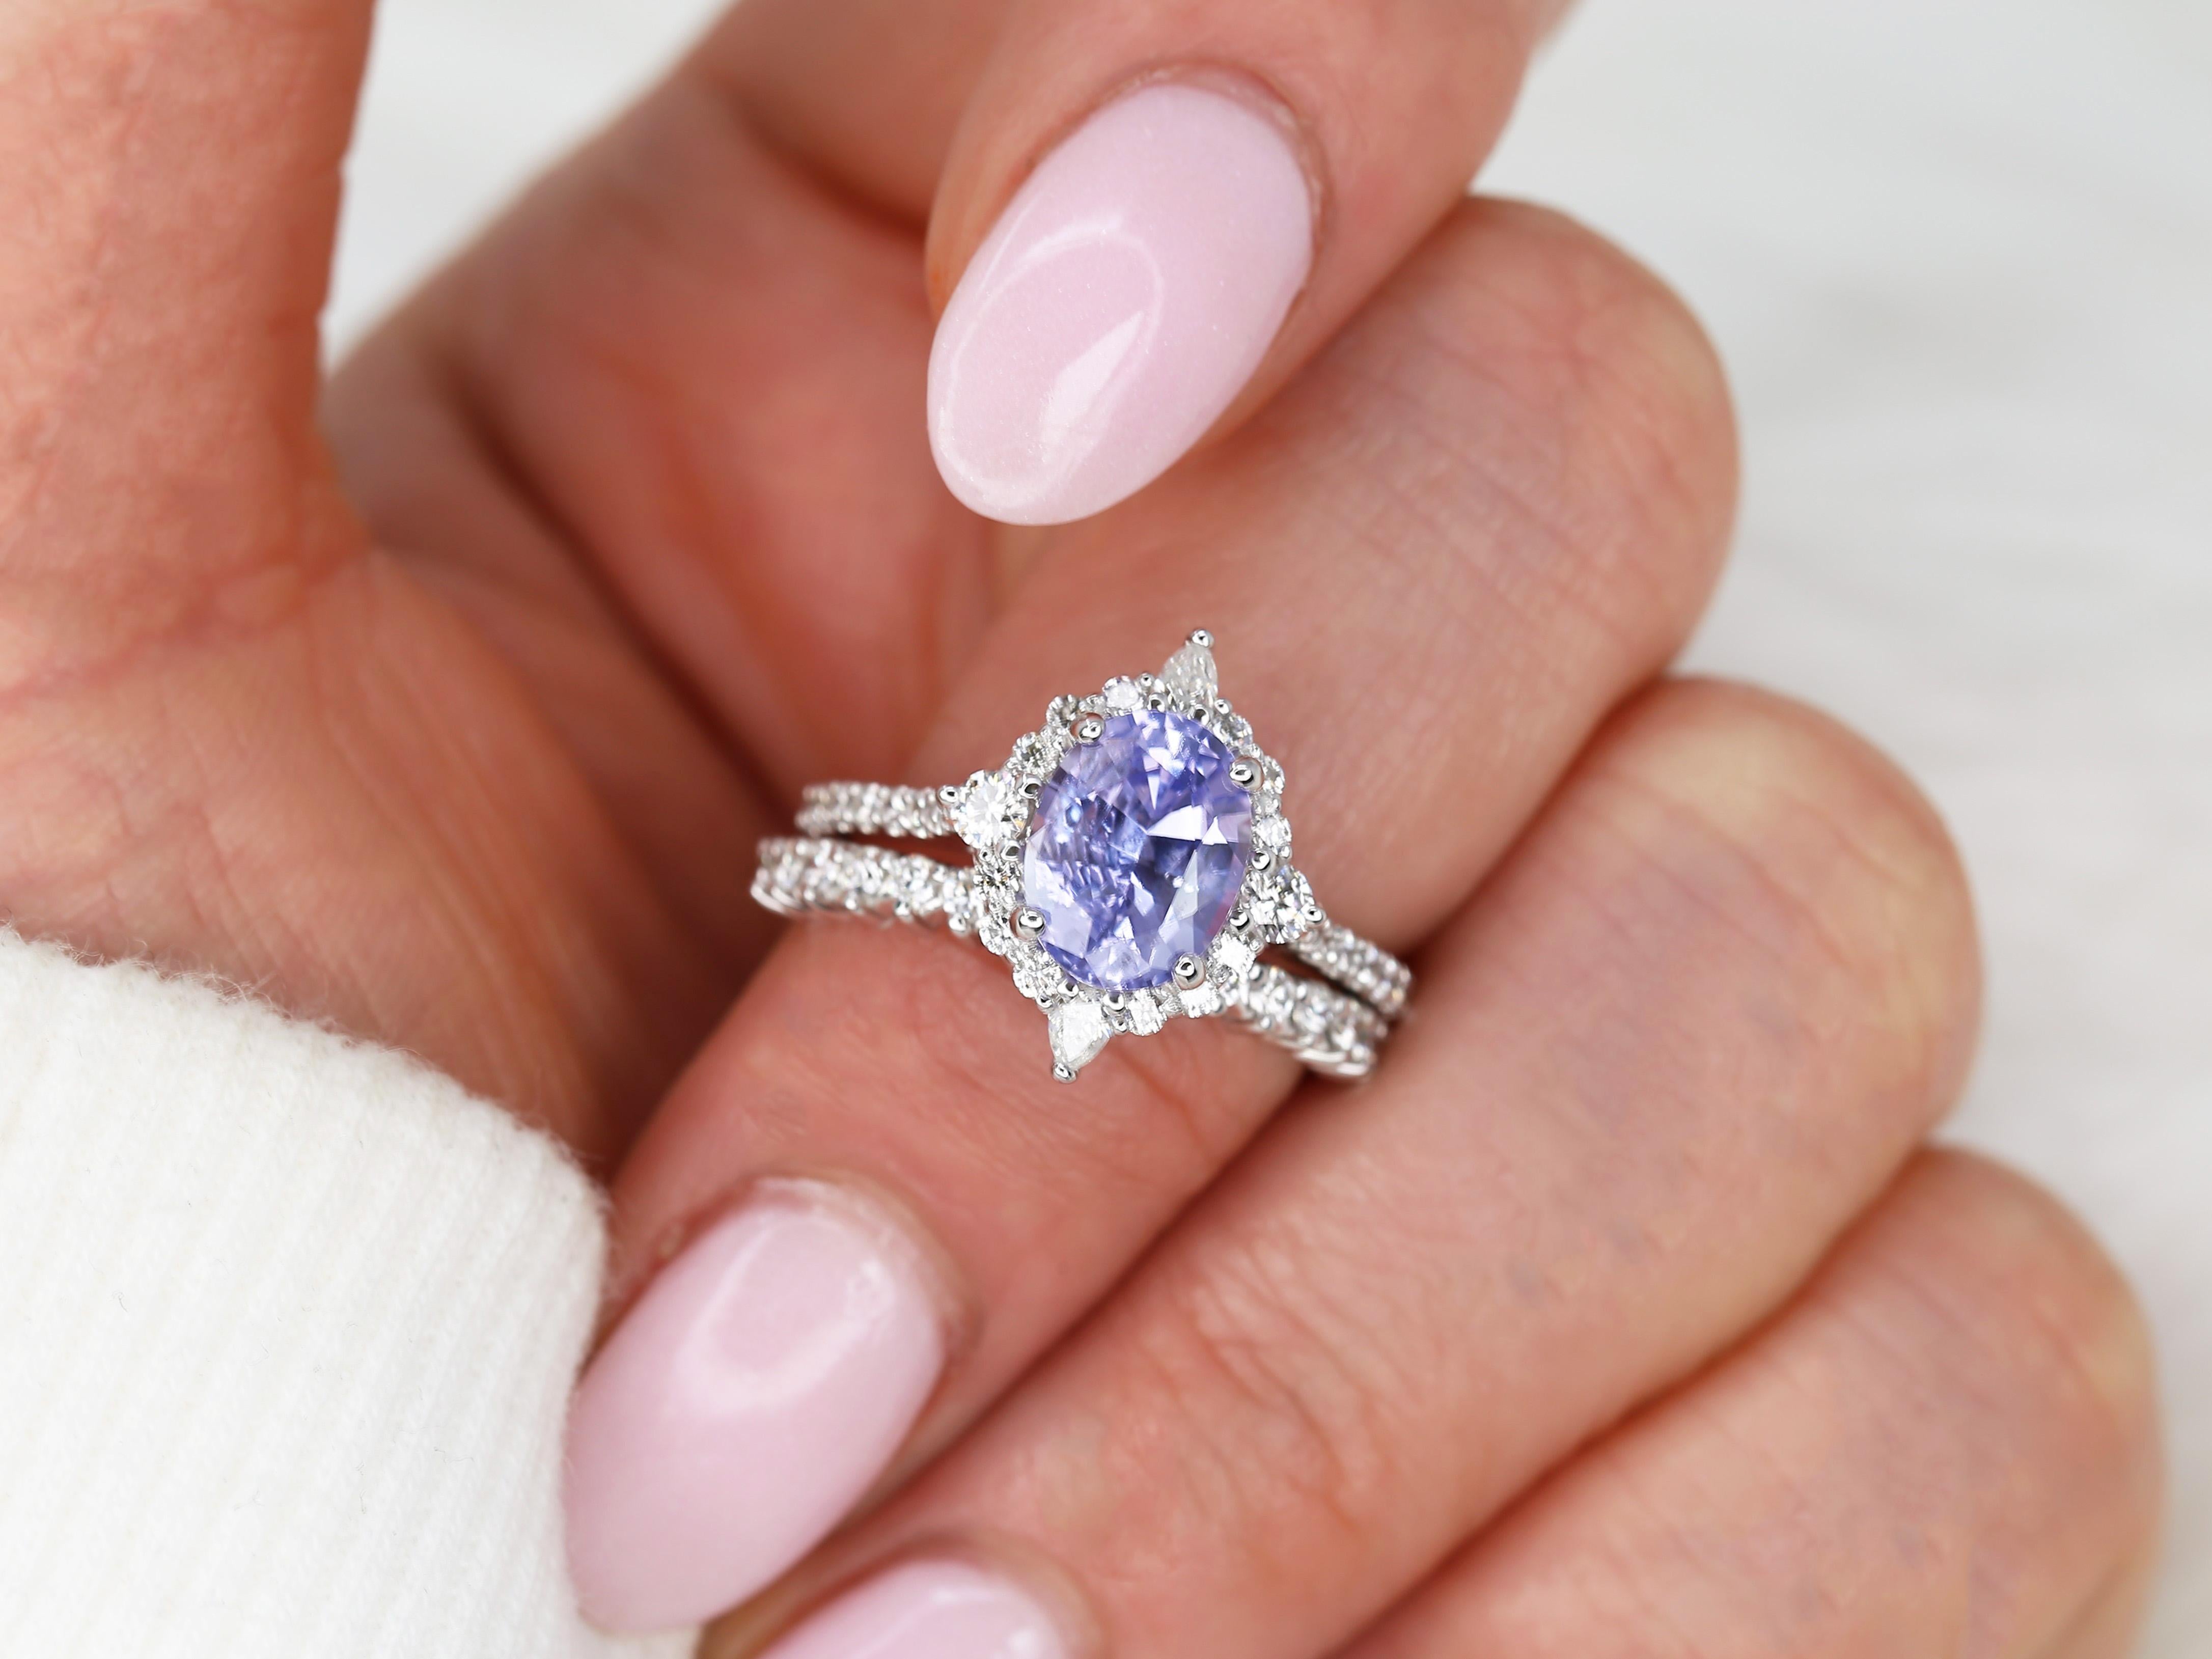 Elevate your style with our unique Lavender Sapphire Halo Ring and Diamond Matching Band. Handmade in Chicago with fair trade sapphire and conflict-free diamonds, expertly set by artisans with 15+ years of experience.

Details of Ring:

Engagement